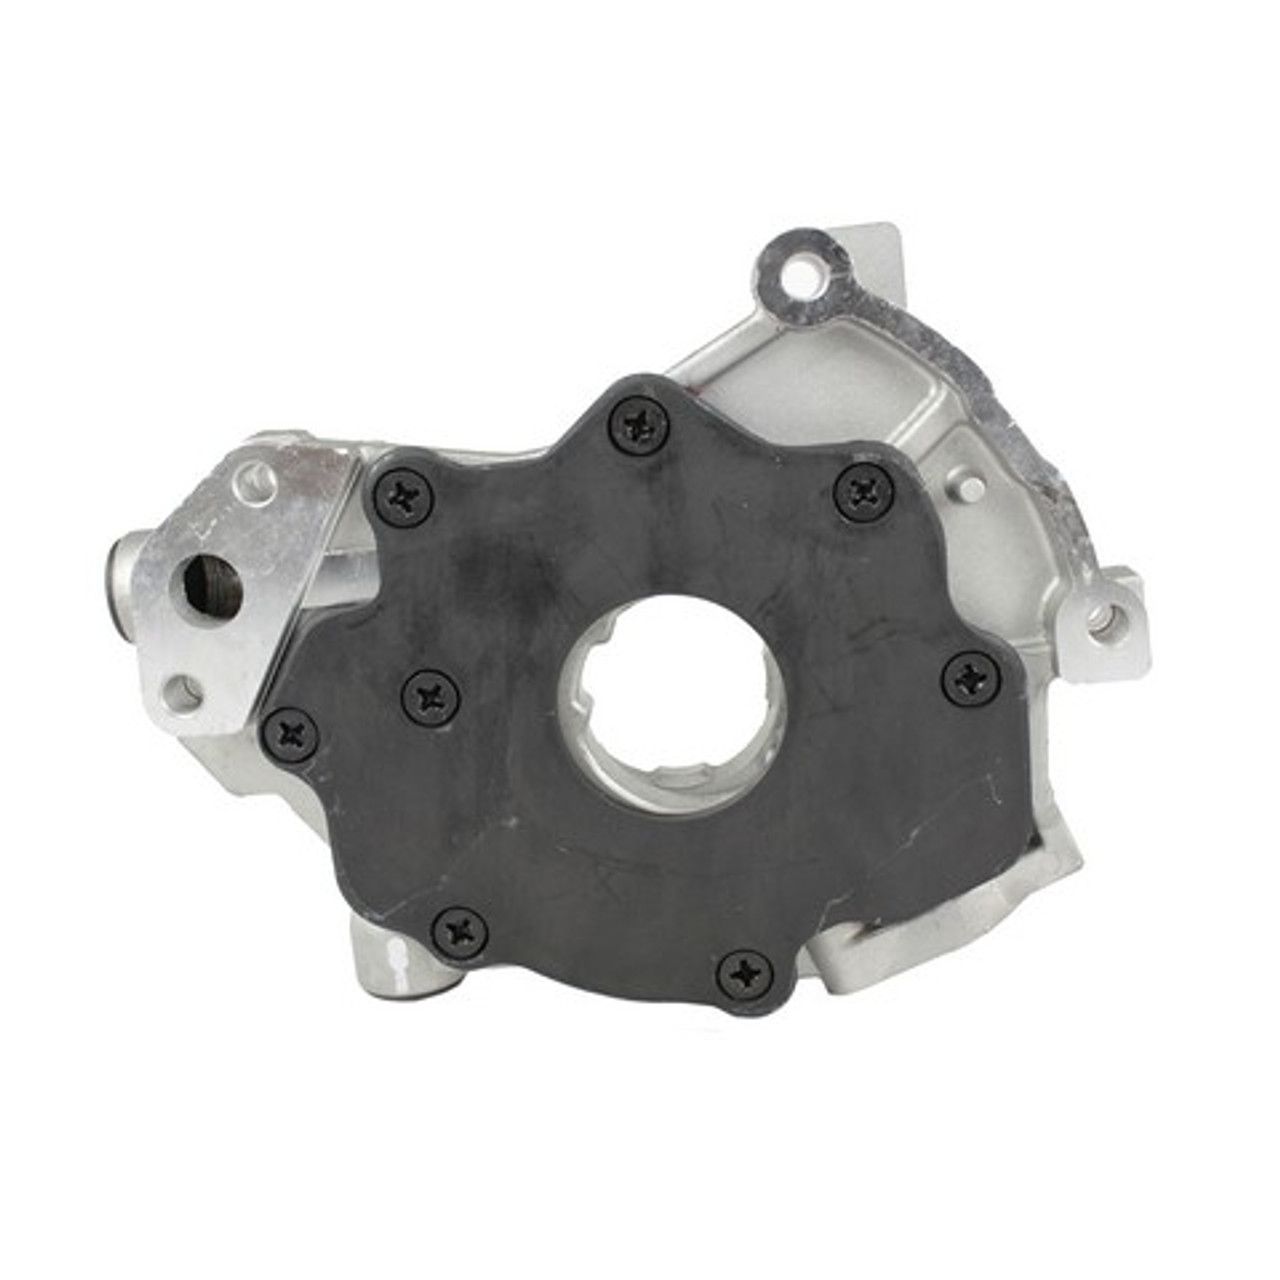 Oil Pump 5.4L 1998 Ford Expedition - OP4131.185